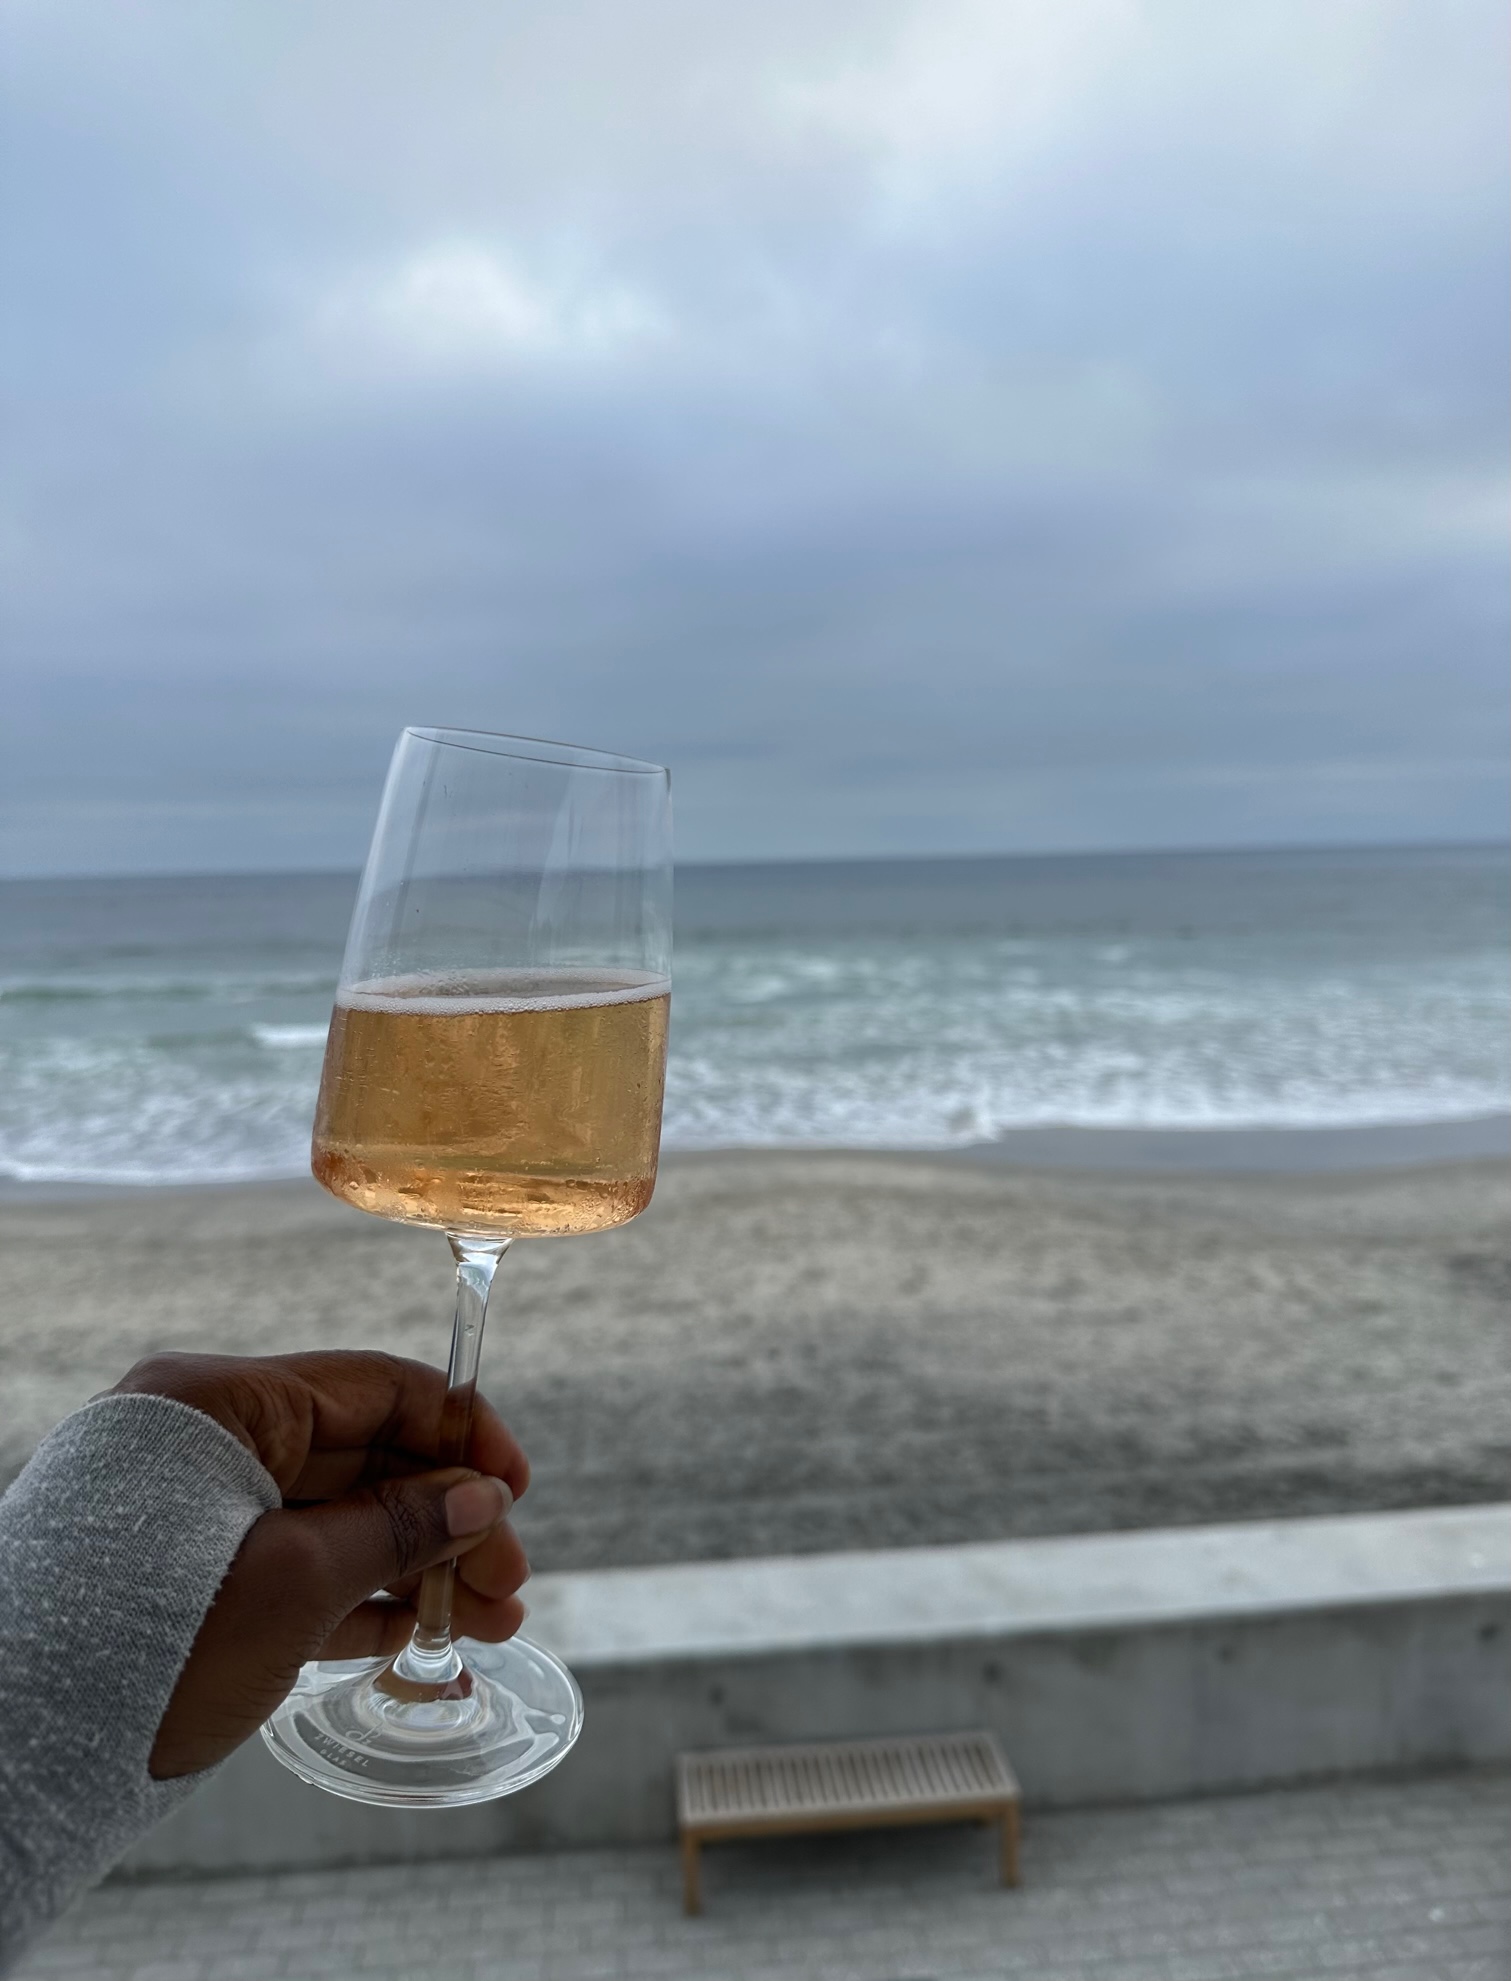 An image of Ariel holding a glass of wine with Del Mar Beach and the ocean as a backdrop.